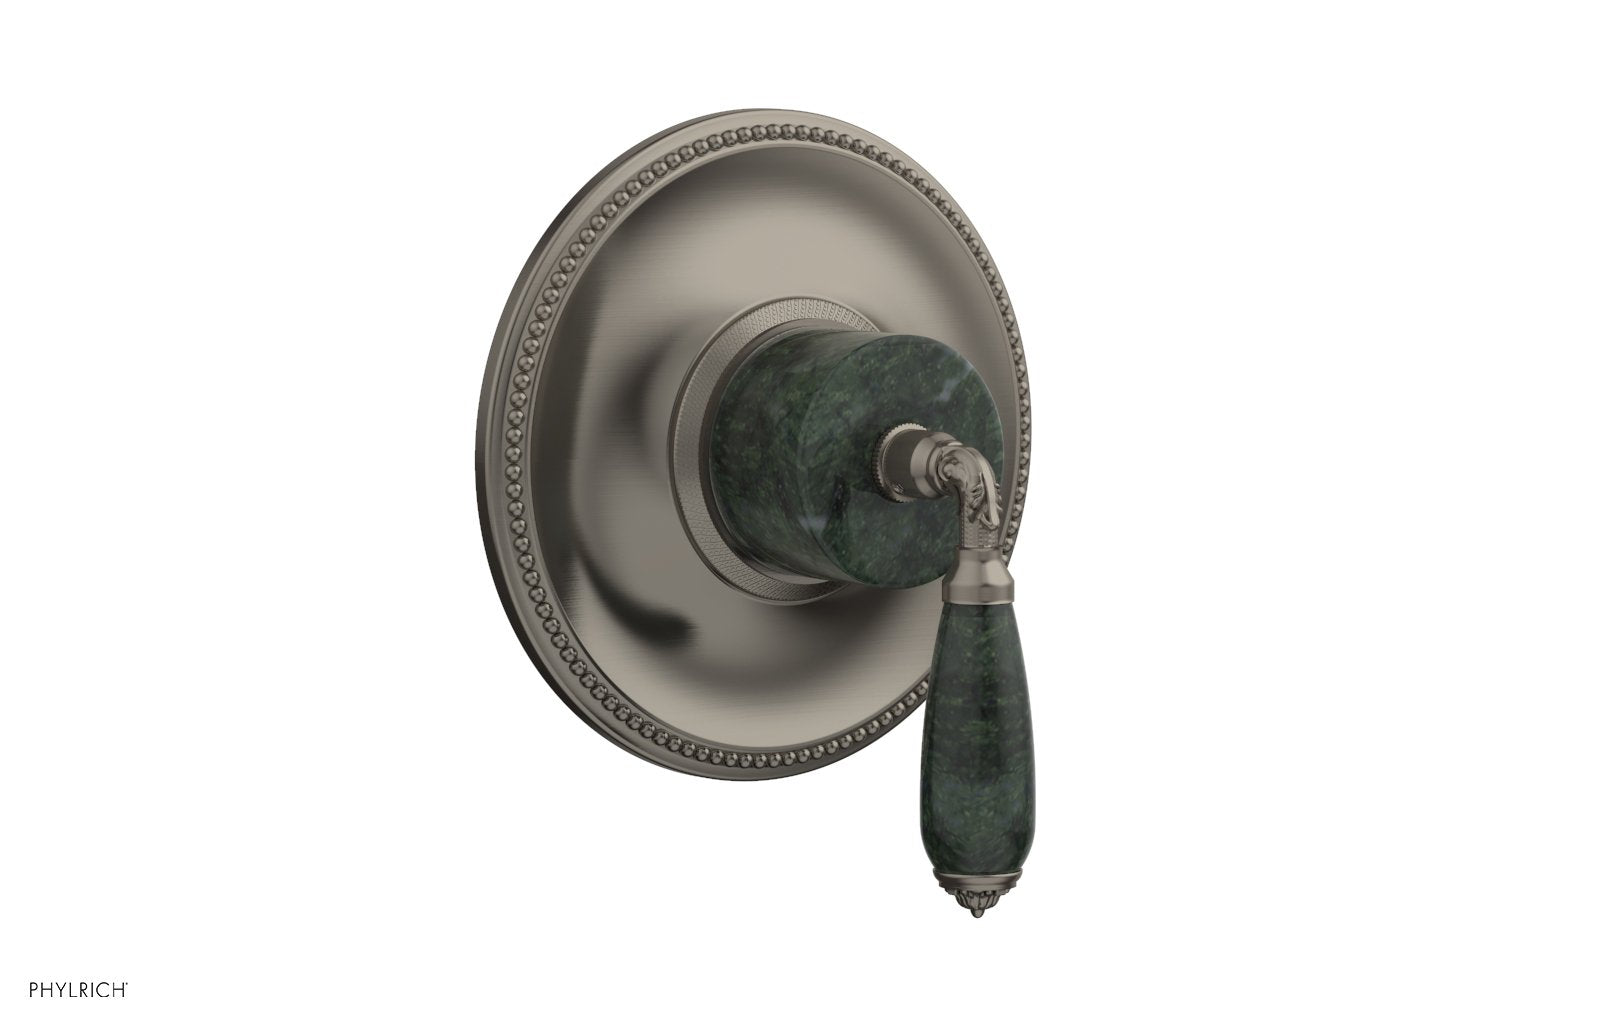 Phylrich VALENCIA Thermostatic Shower Trim, Green Marble Lever Handle